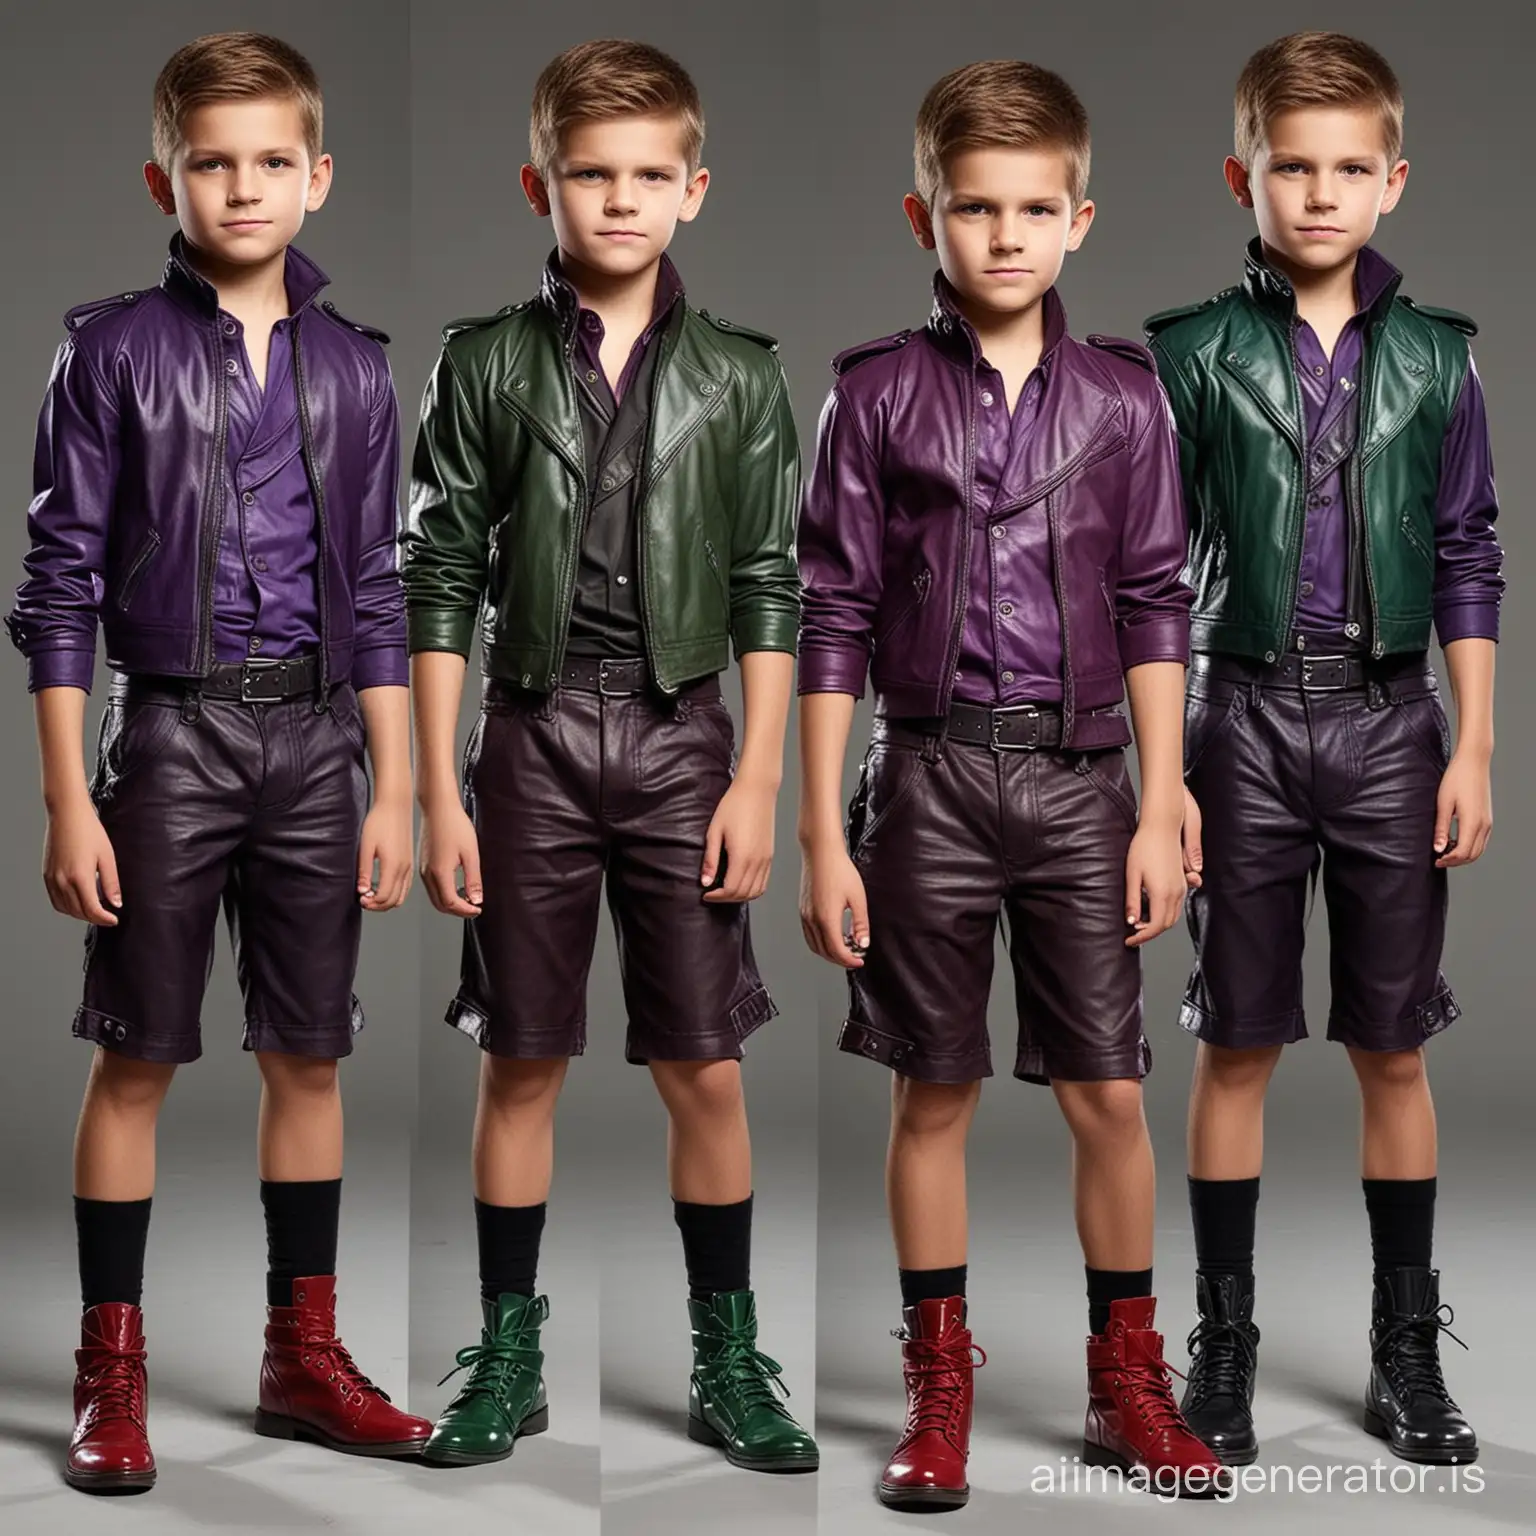 Create a villain outfit for a strong 8 year old boy villain with abs, cool, wicked, leather, shorts, comfortable yet intimidating, various shades of purple with hints of both green and red, both red and green should be included in every outfit but purple should be the main color, the shoes should also be coloured and match the outfit